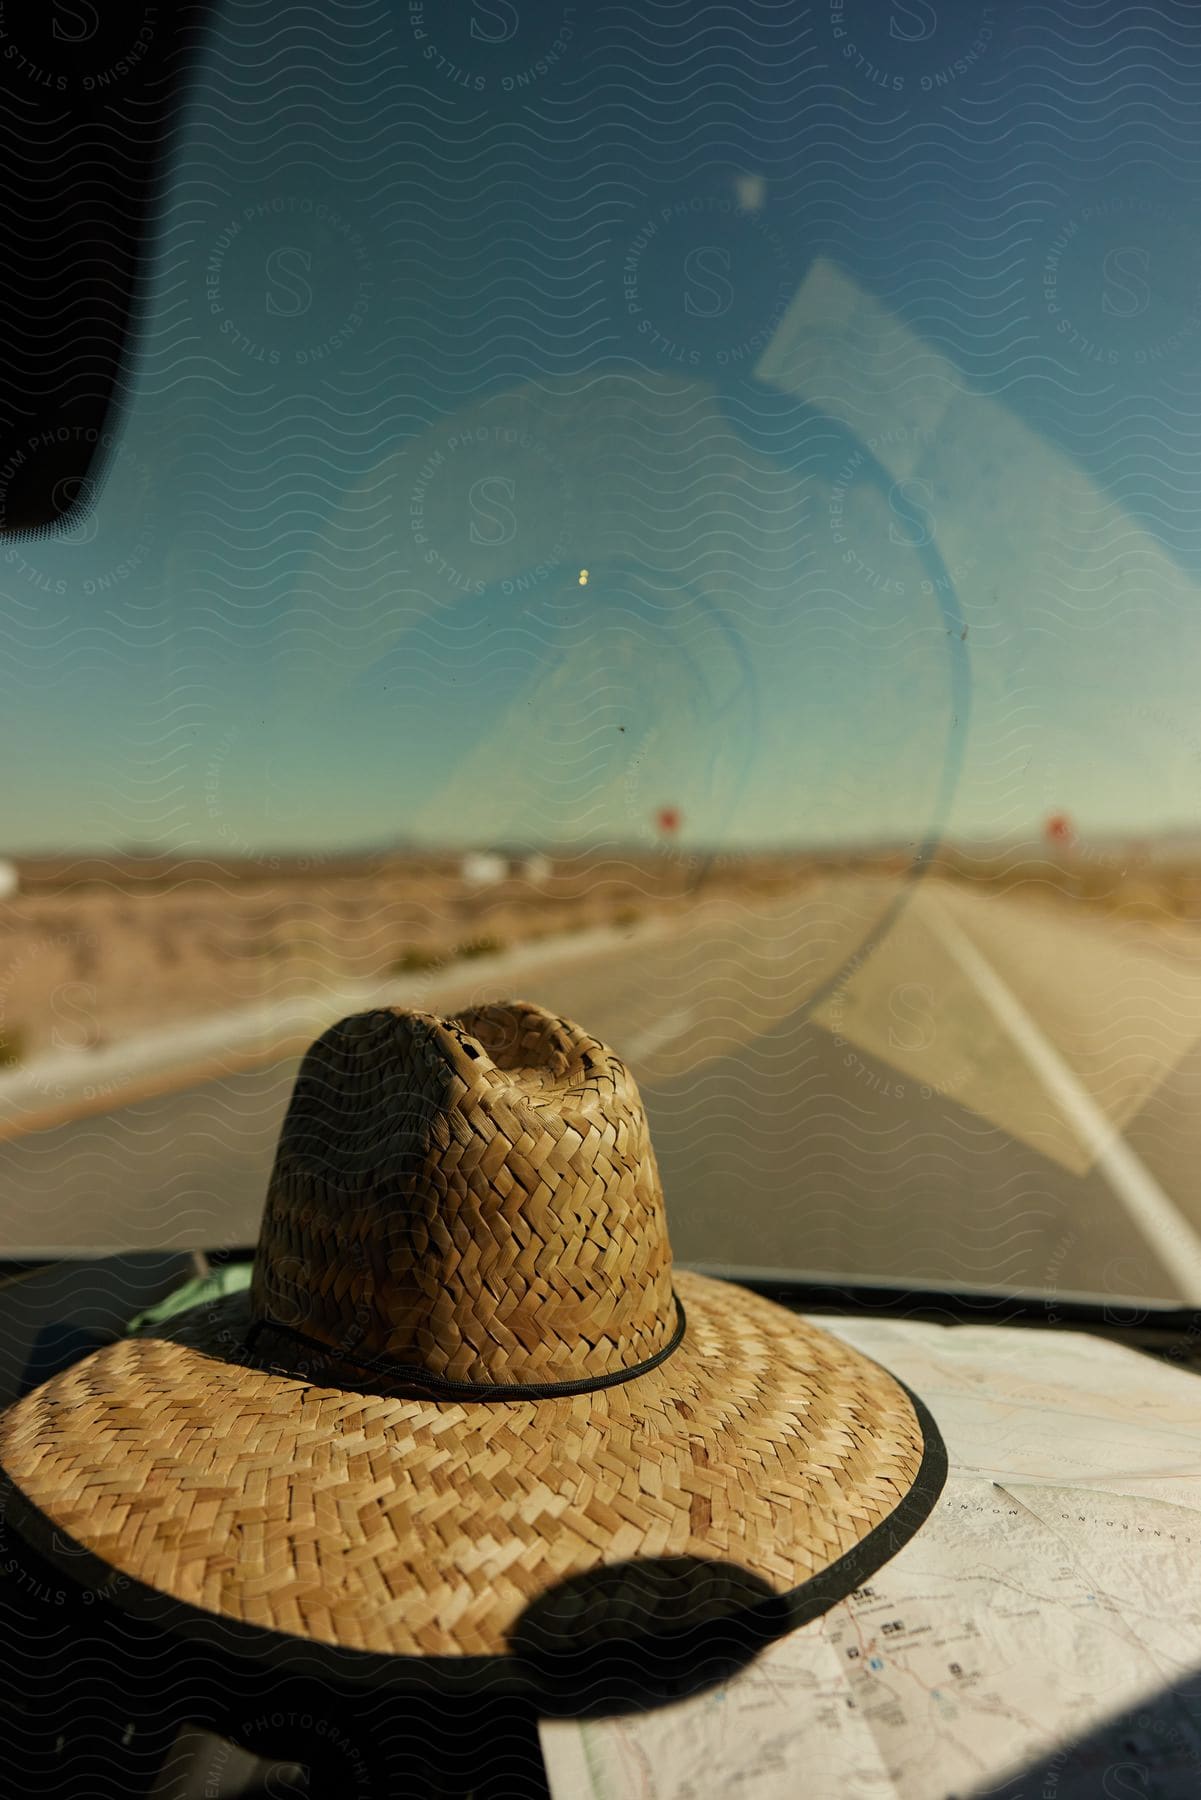 Straw hat accessory inside a car on the windshield overlooking a paved road in the middle of a deserted place.